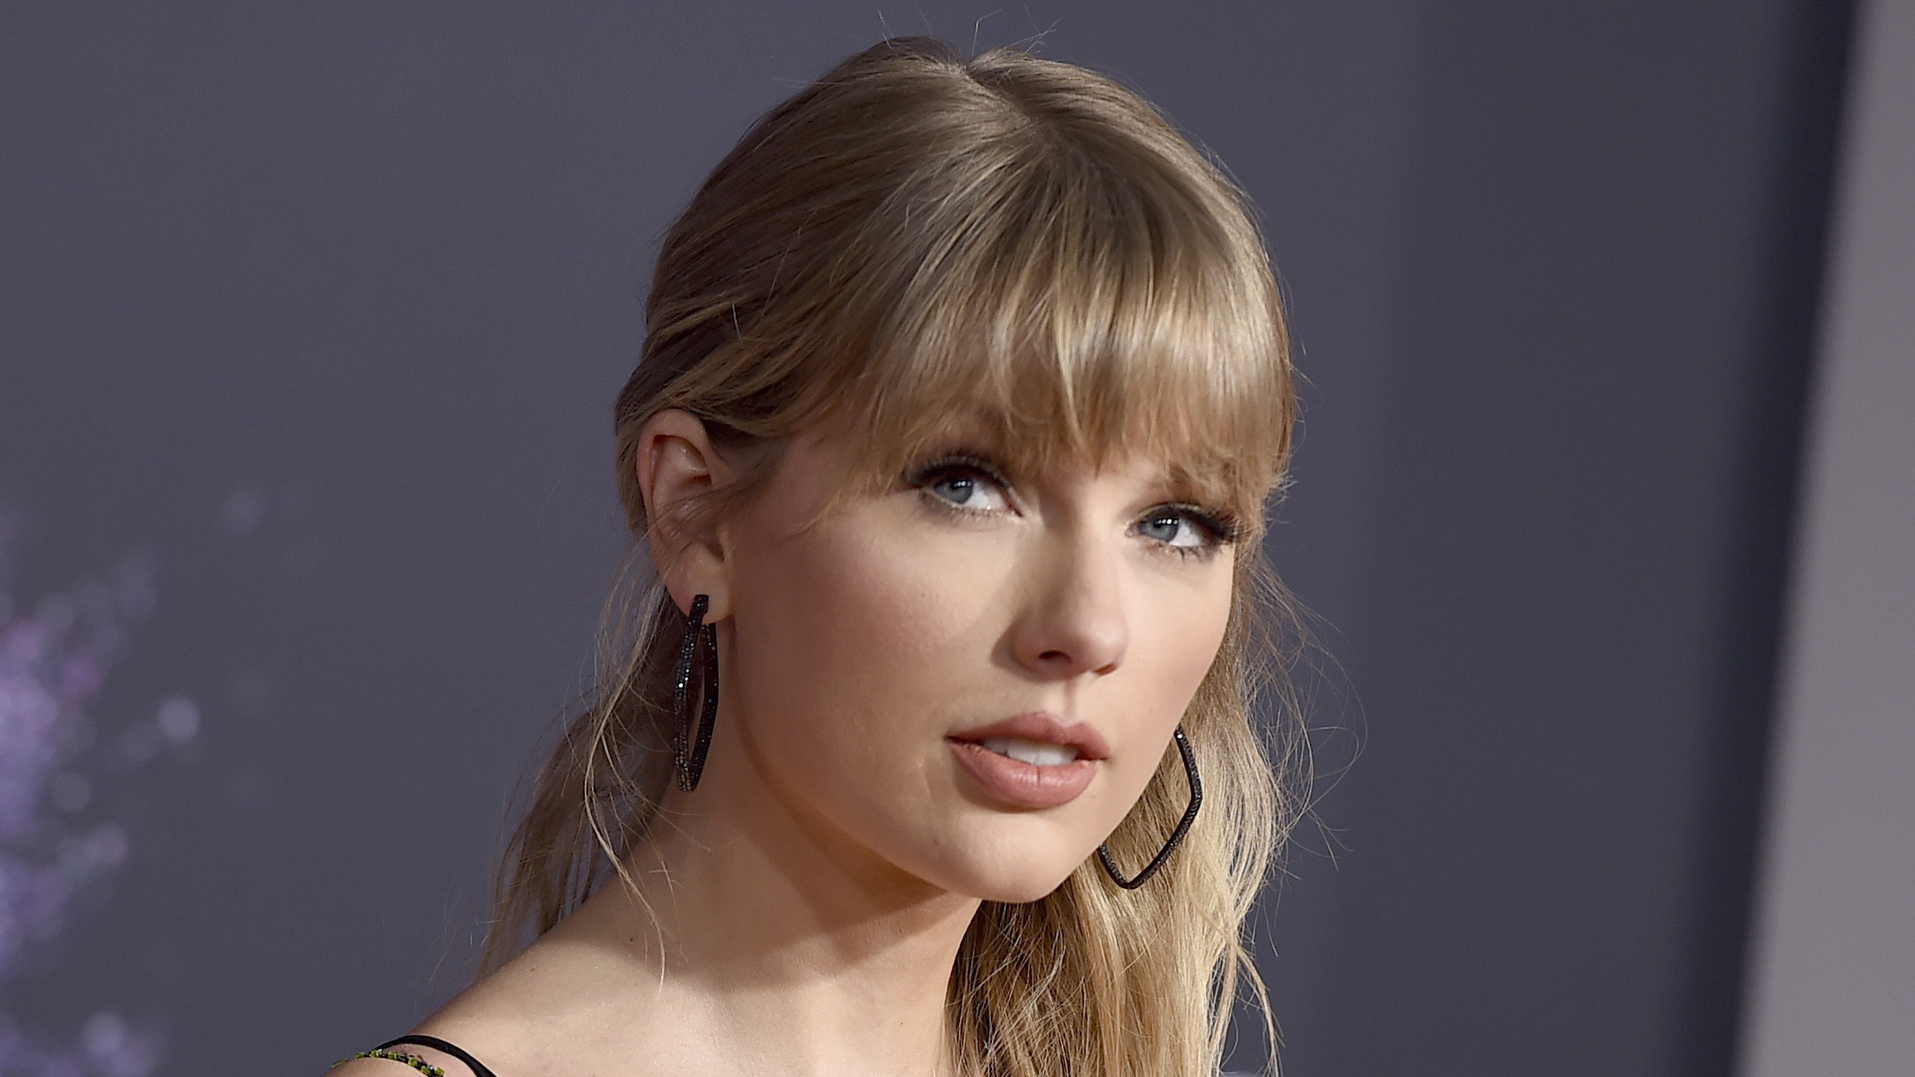 FILE - This Nov. 24, 2019 file photo shows Taylor Swift at the American Music Awards in Los Angeles. Swift was named songwriter of the year at the second annual Apple Music Awards. (Photo by Jordan Strauss/Invision/AP, File)